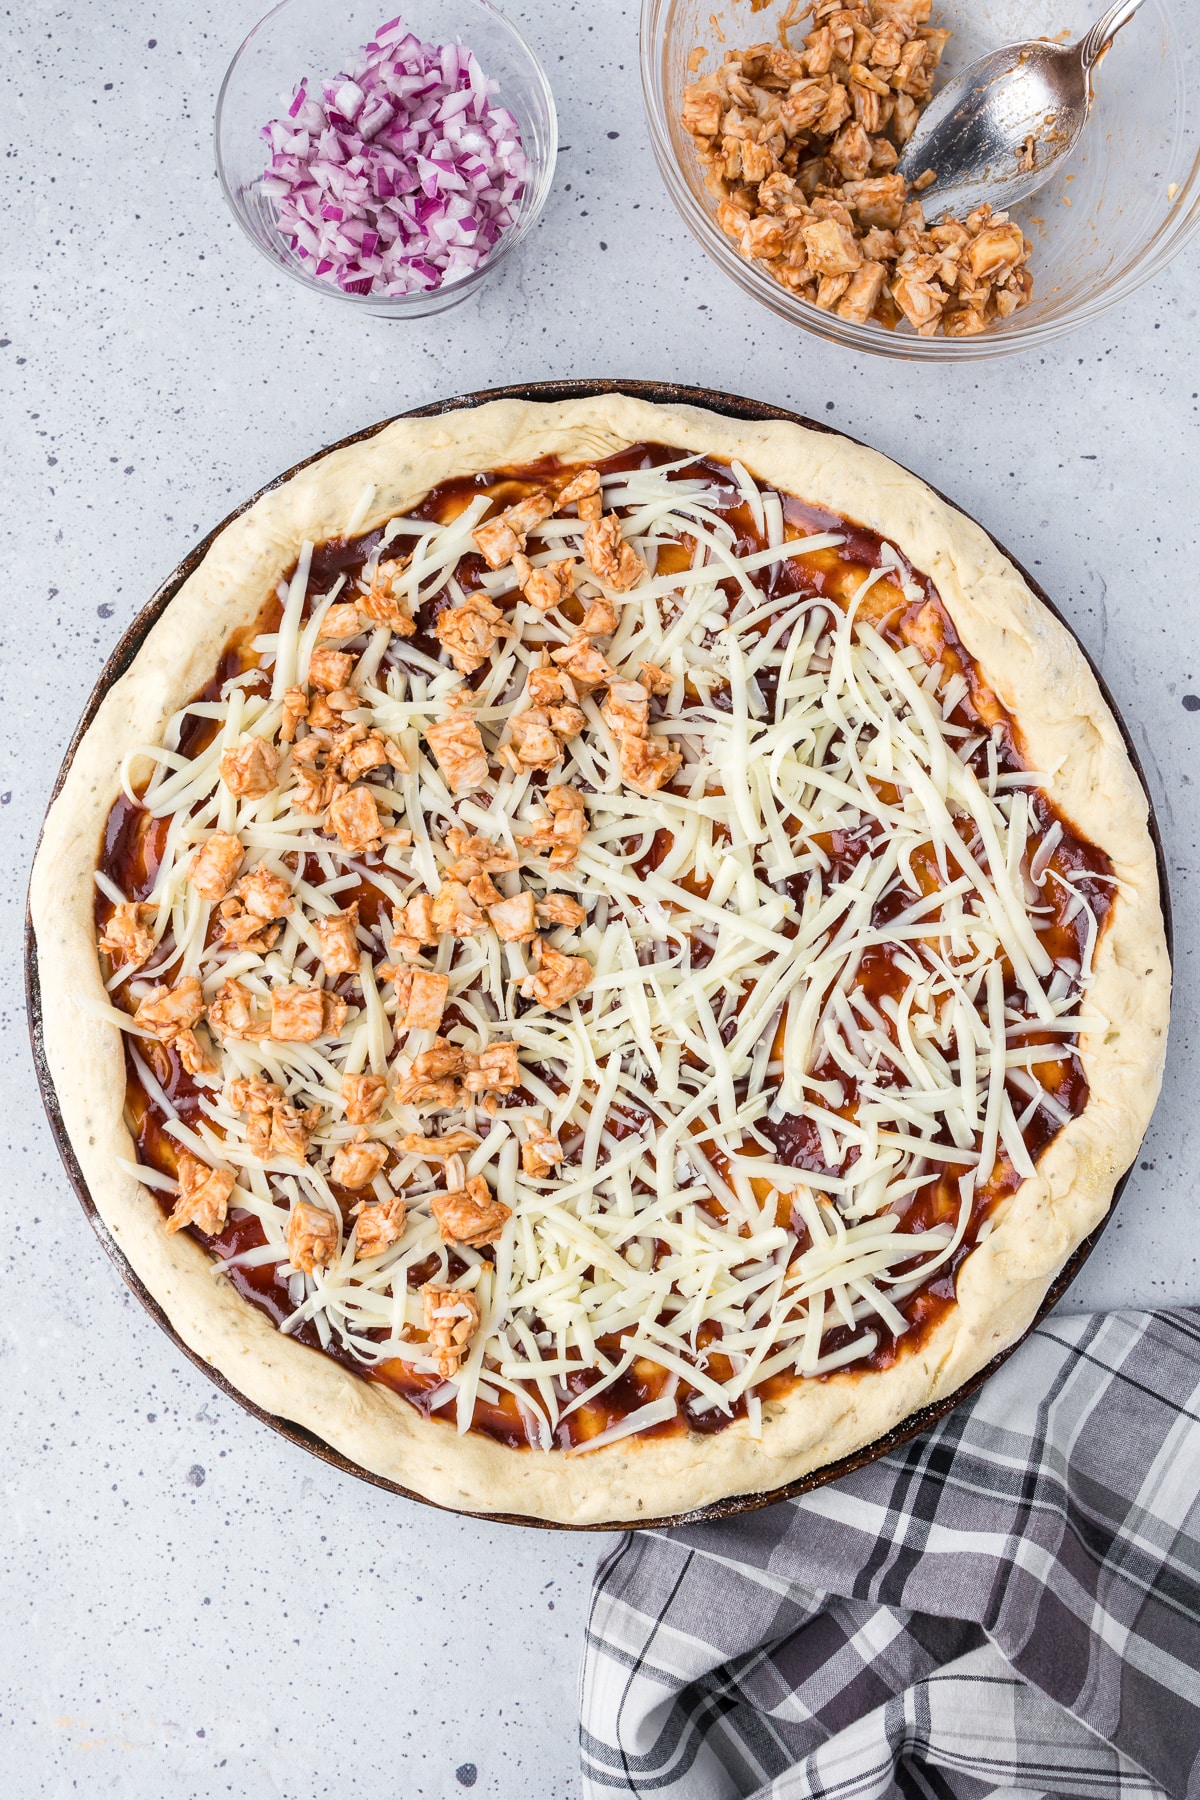 Chopped bbq chicken being spread over the top of pizza dough, sauce and cheese.